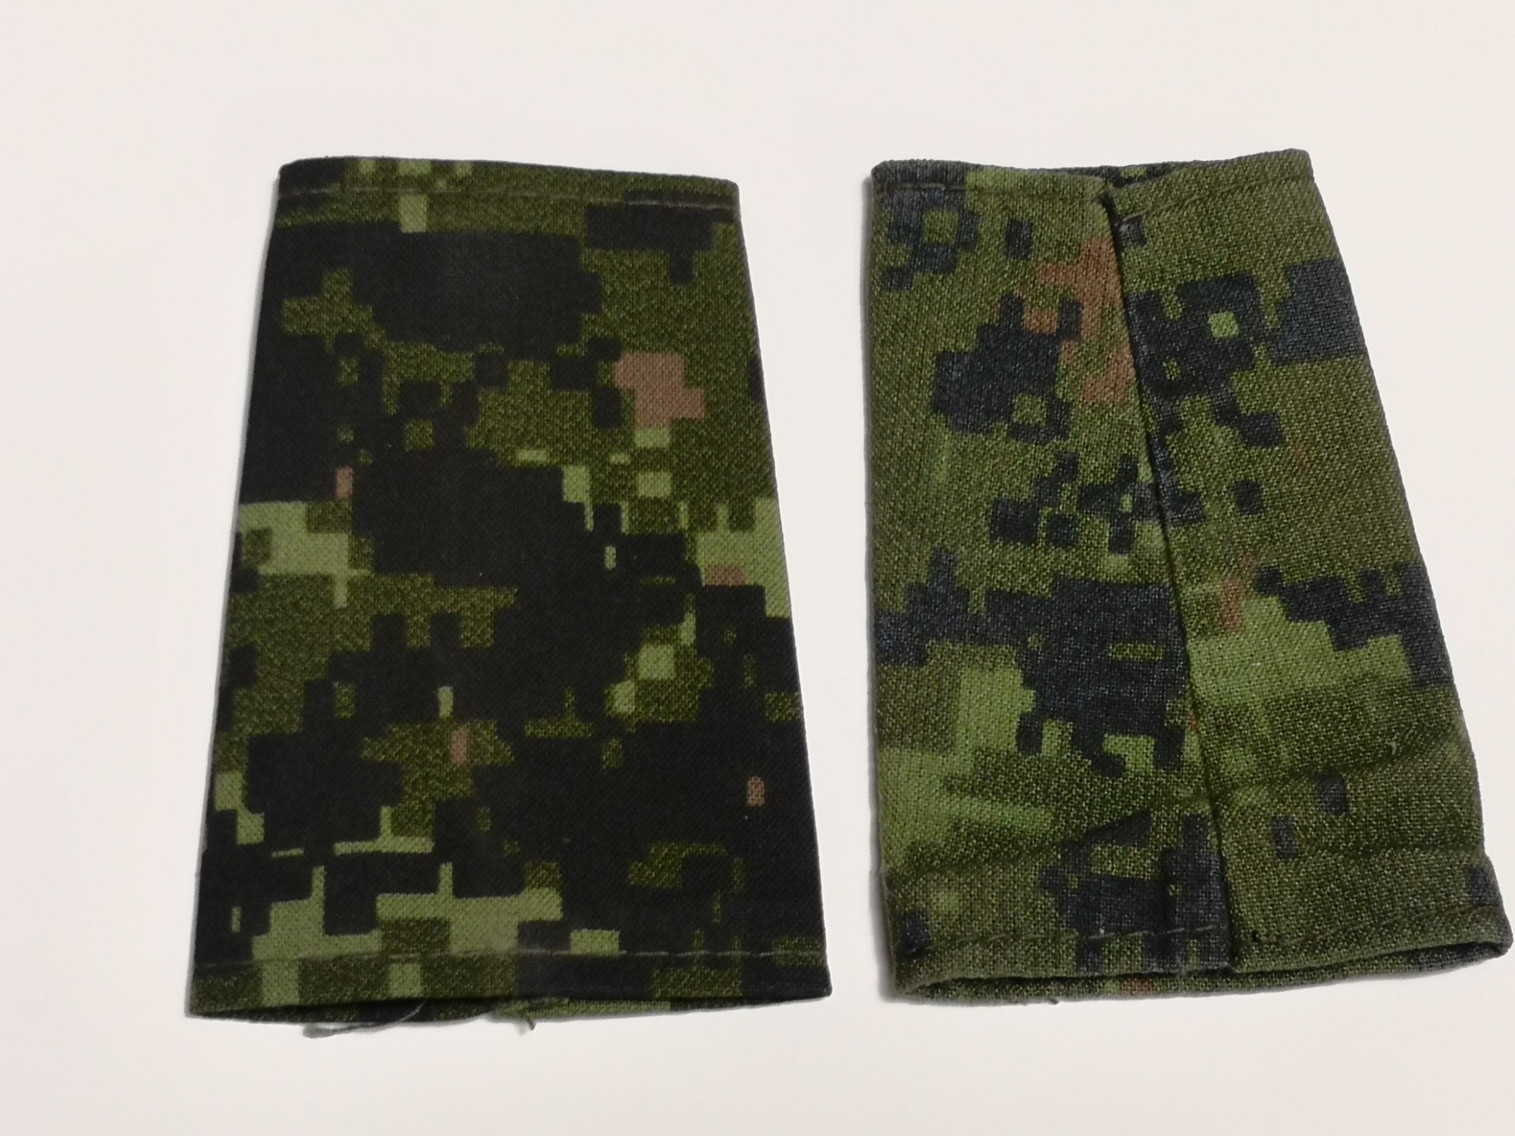 Canadian Armed Forces Cadpat Rank Epaulets Rank Only - Private (Basic)